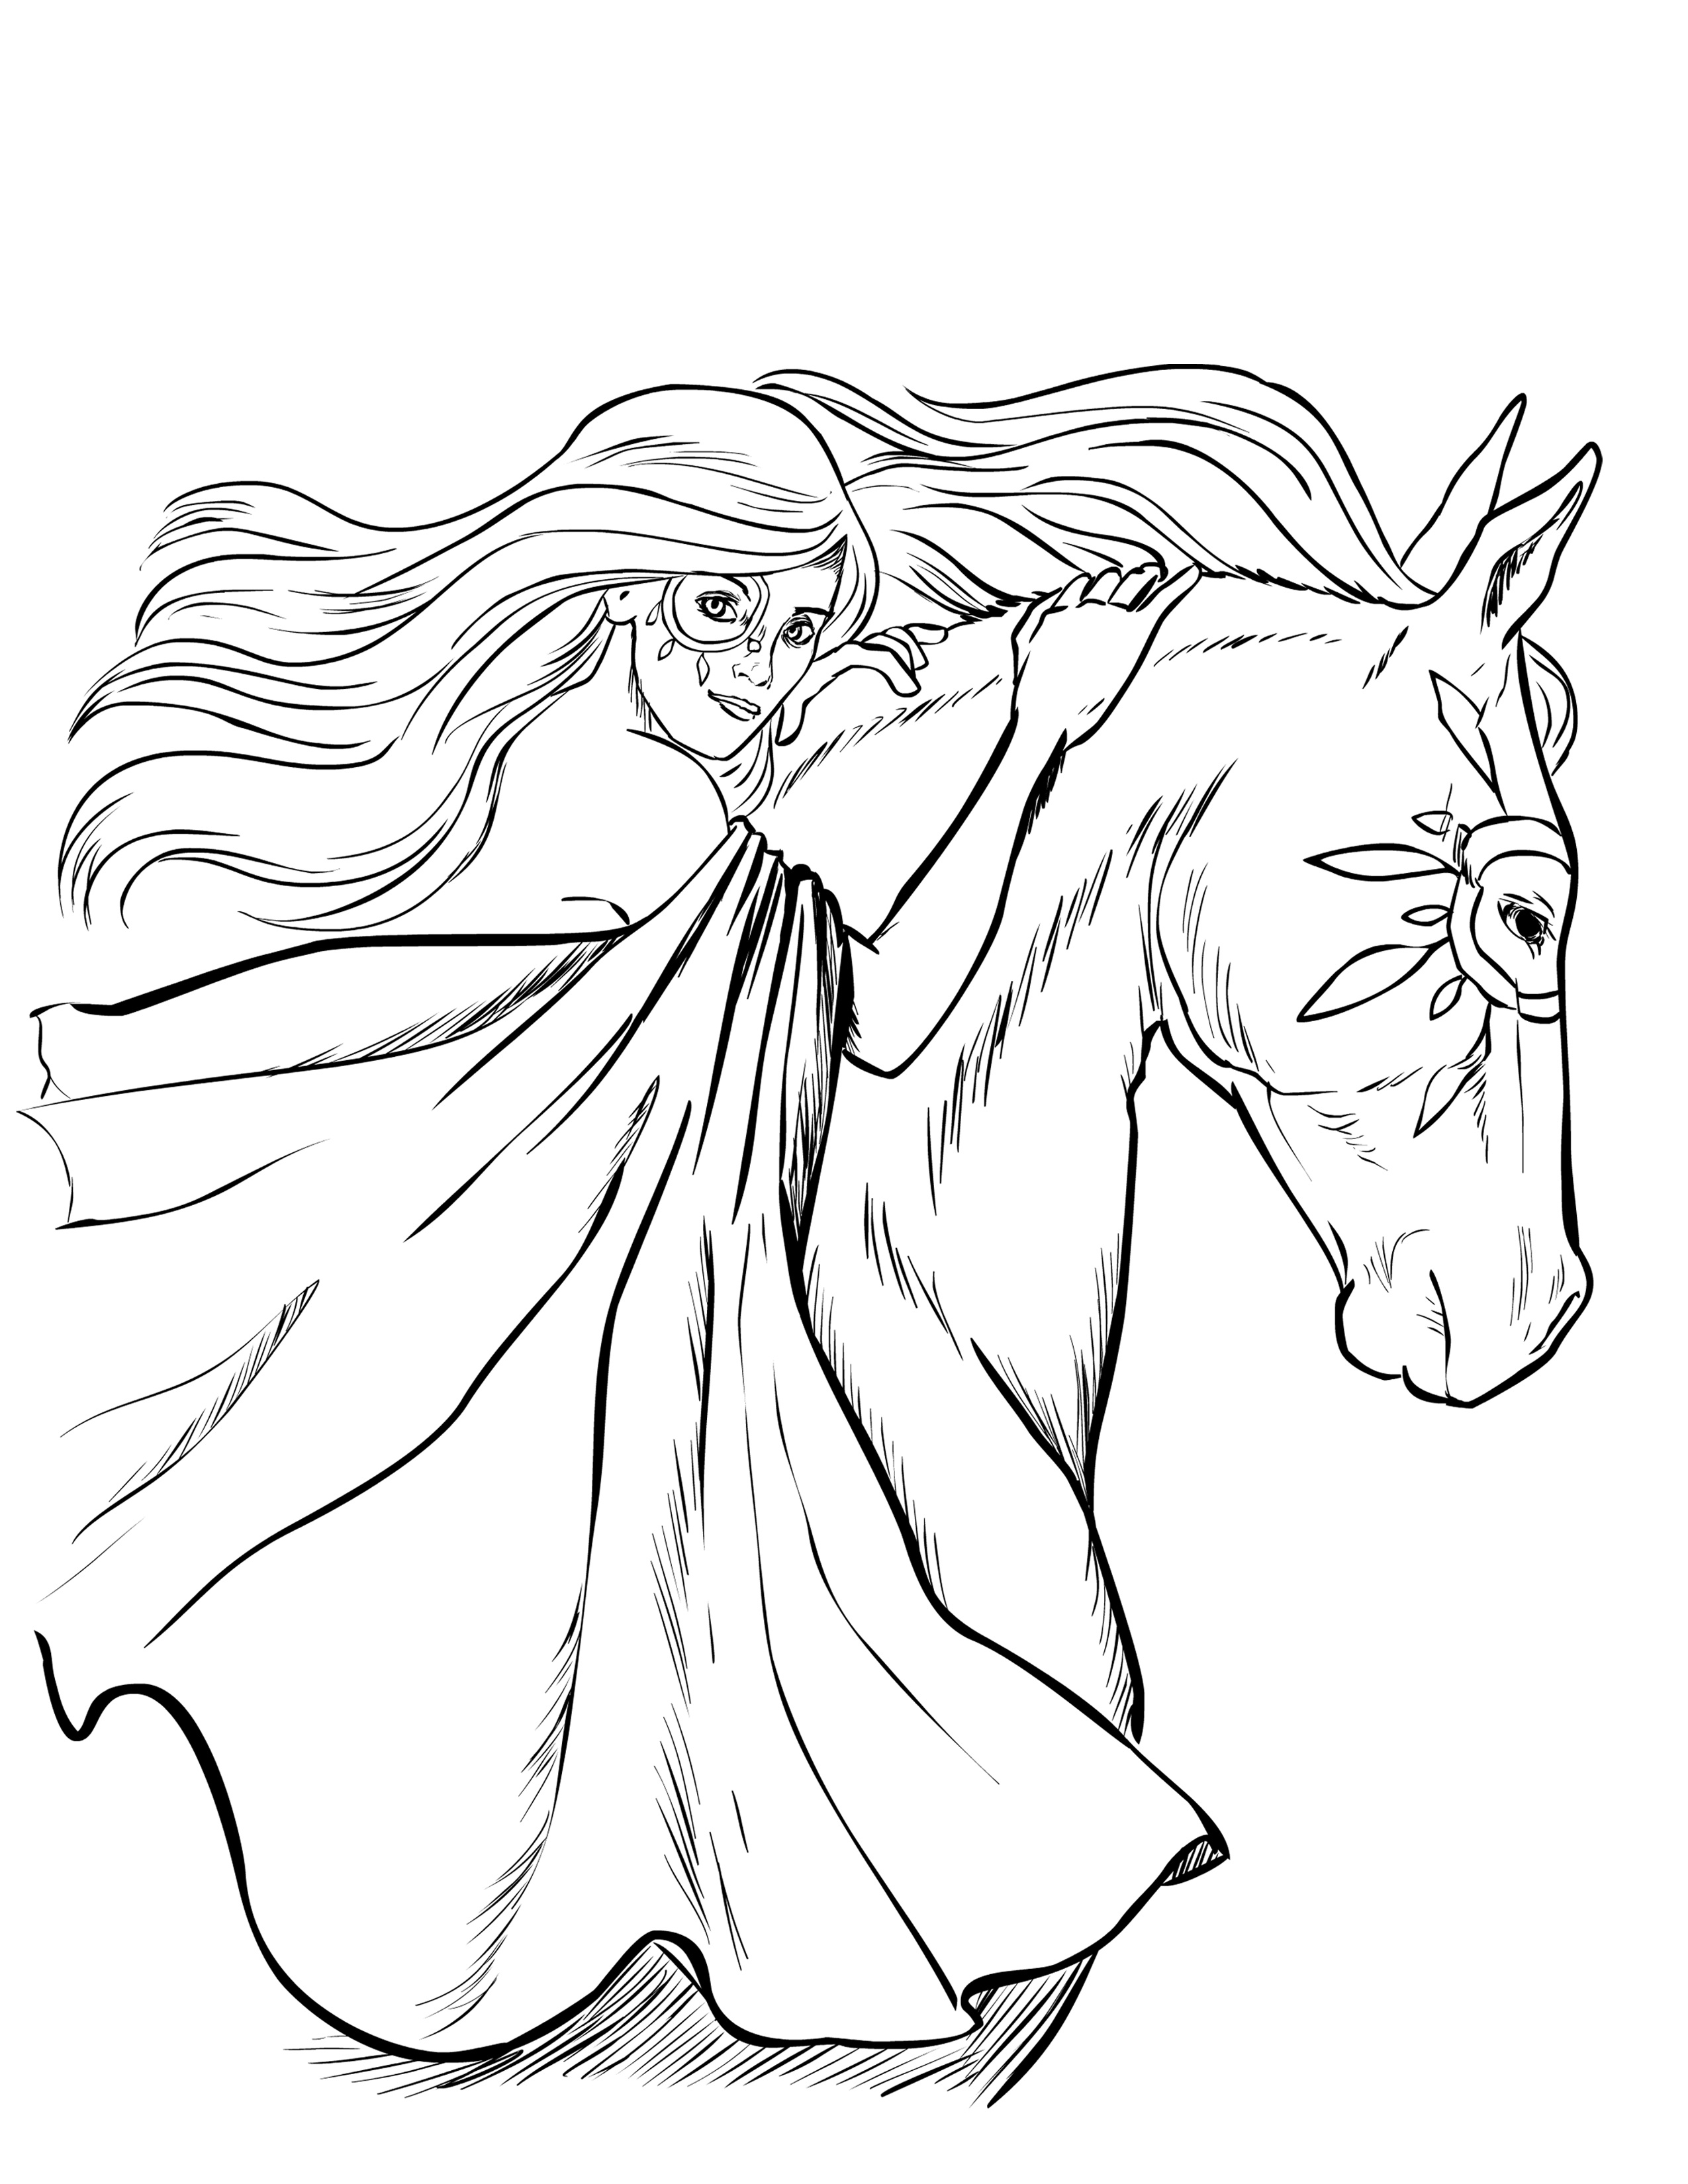 Horse Coloring Pages For Adults - Free Horse Coloring Pages Selah - Free Printable Horseshoe Coloring Pages